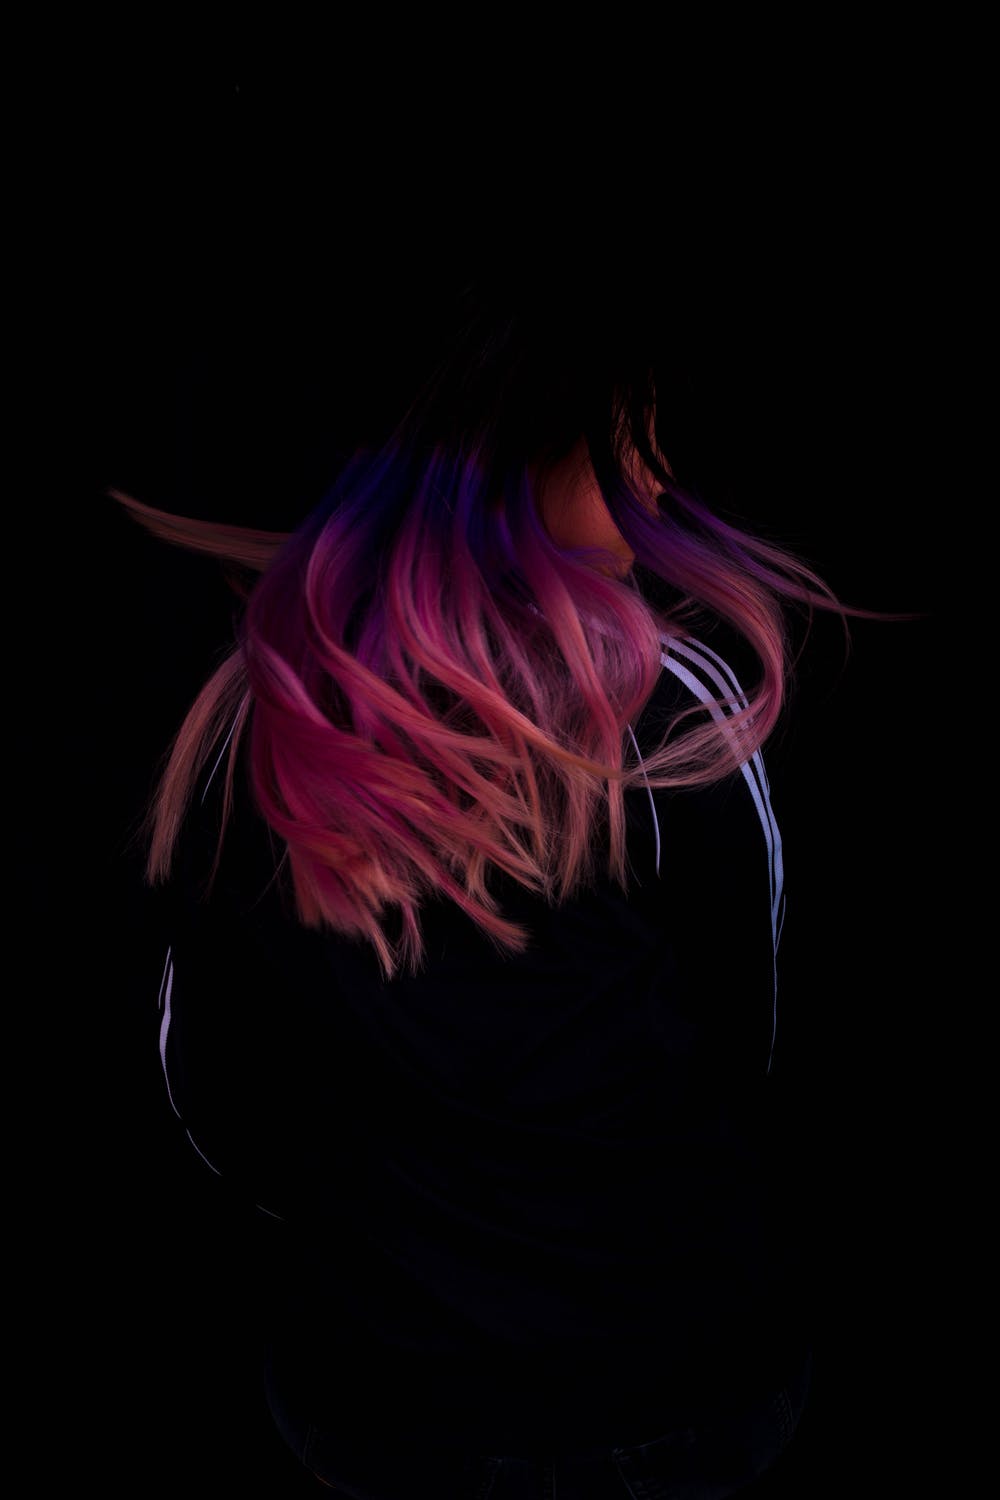 Color hair on black background